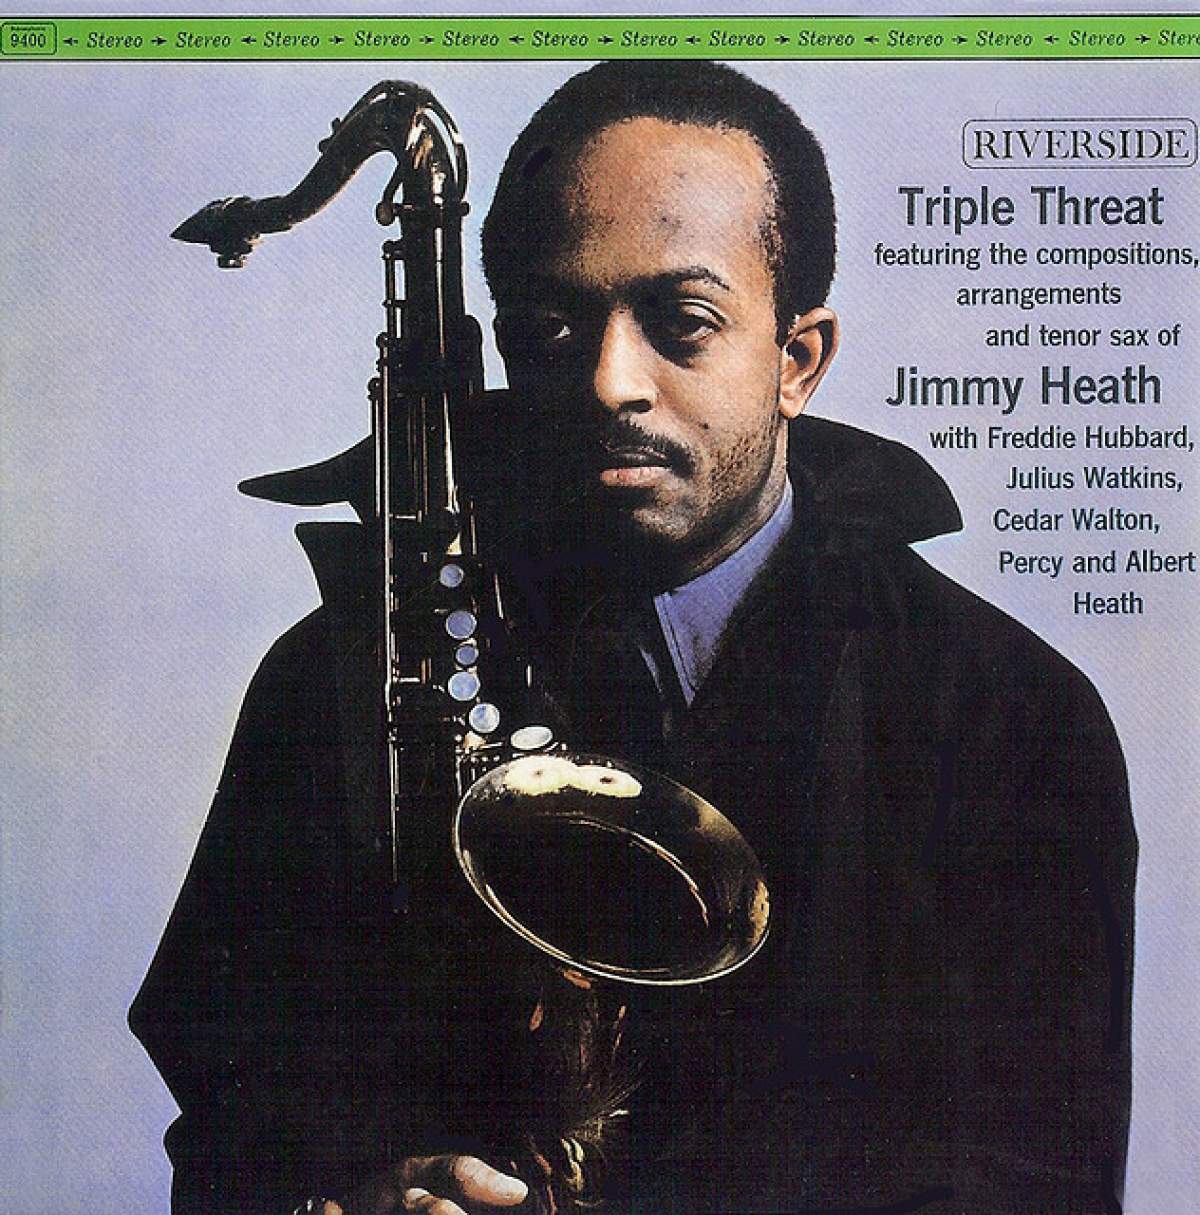 LP cover for saxophonist Jimmy Heath's TRIPLE THREAT.